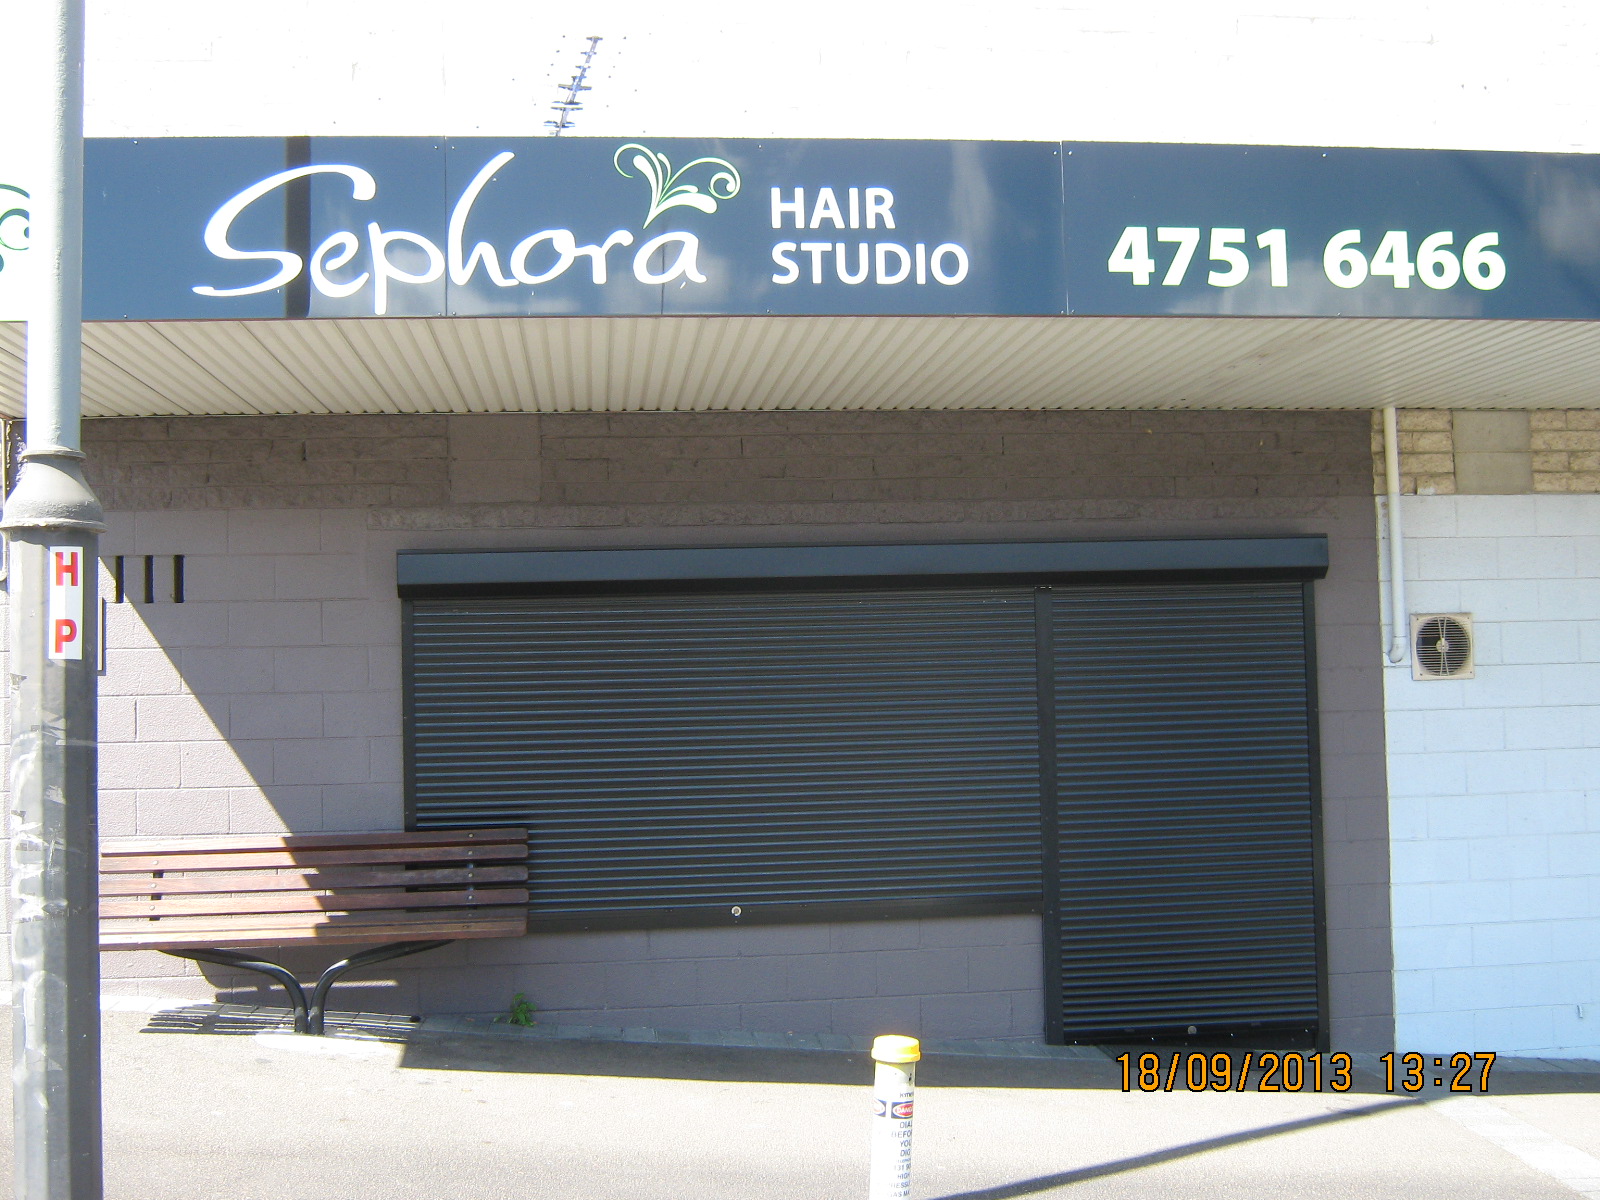 Commercial Project - Hair Studio with shutters closed